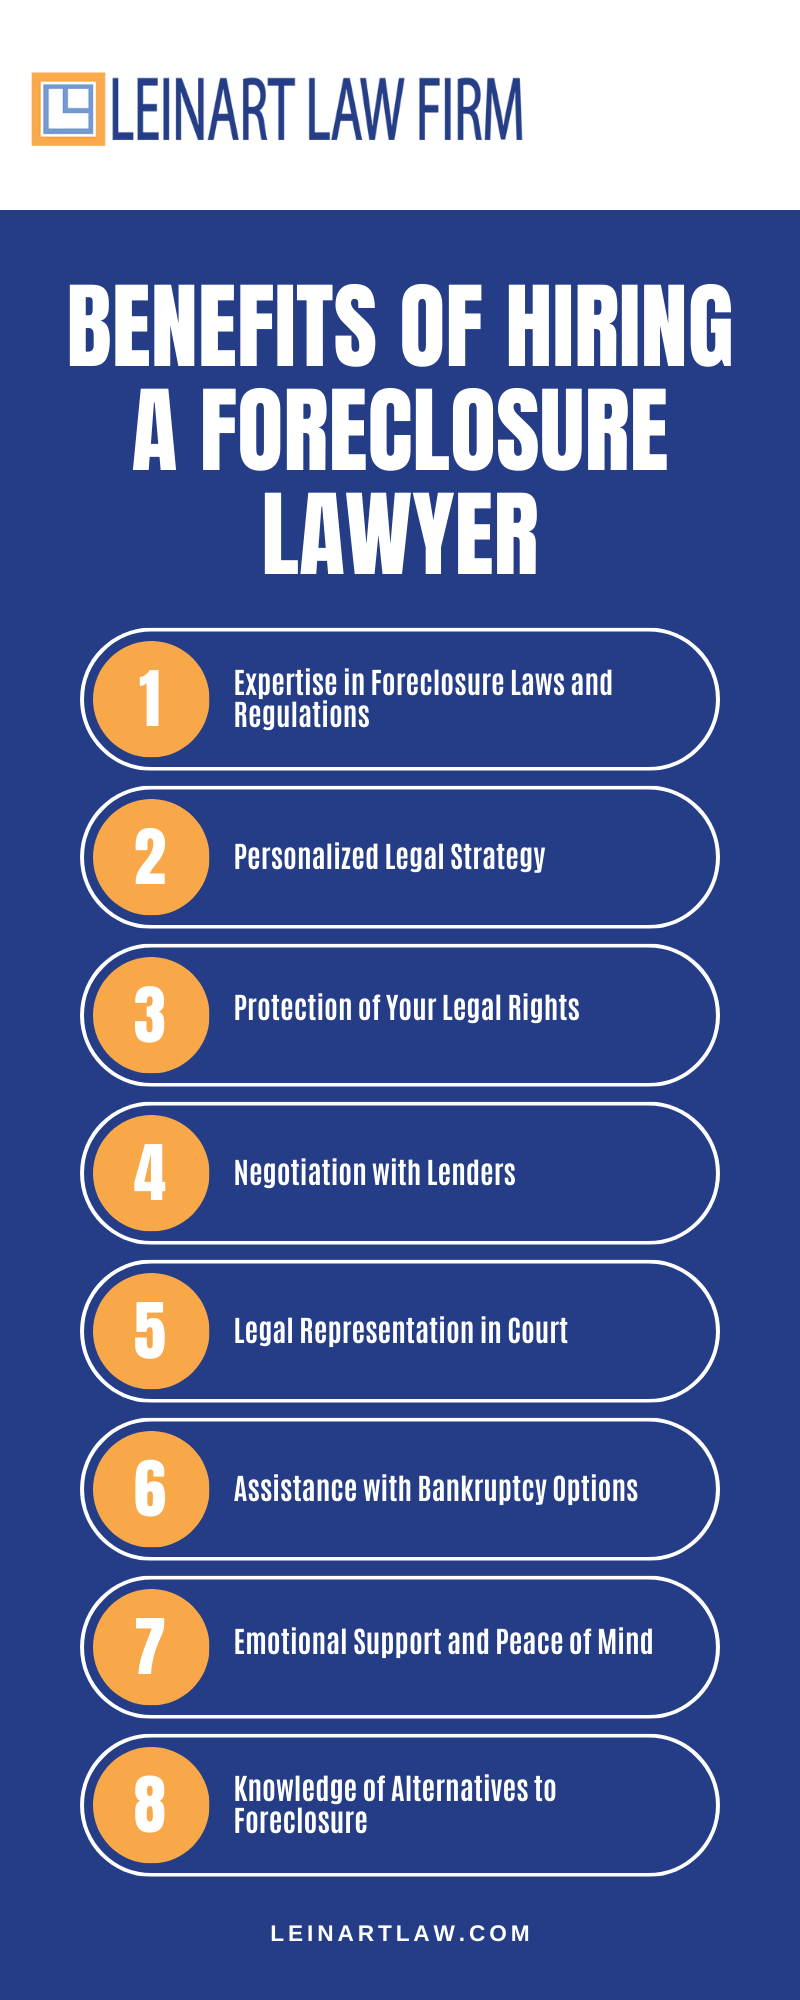 Benefits Of Hiring A Foreclosure Lawyer Infographic